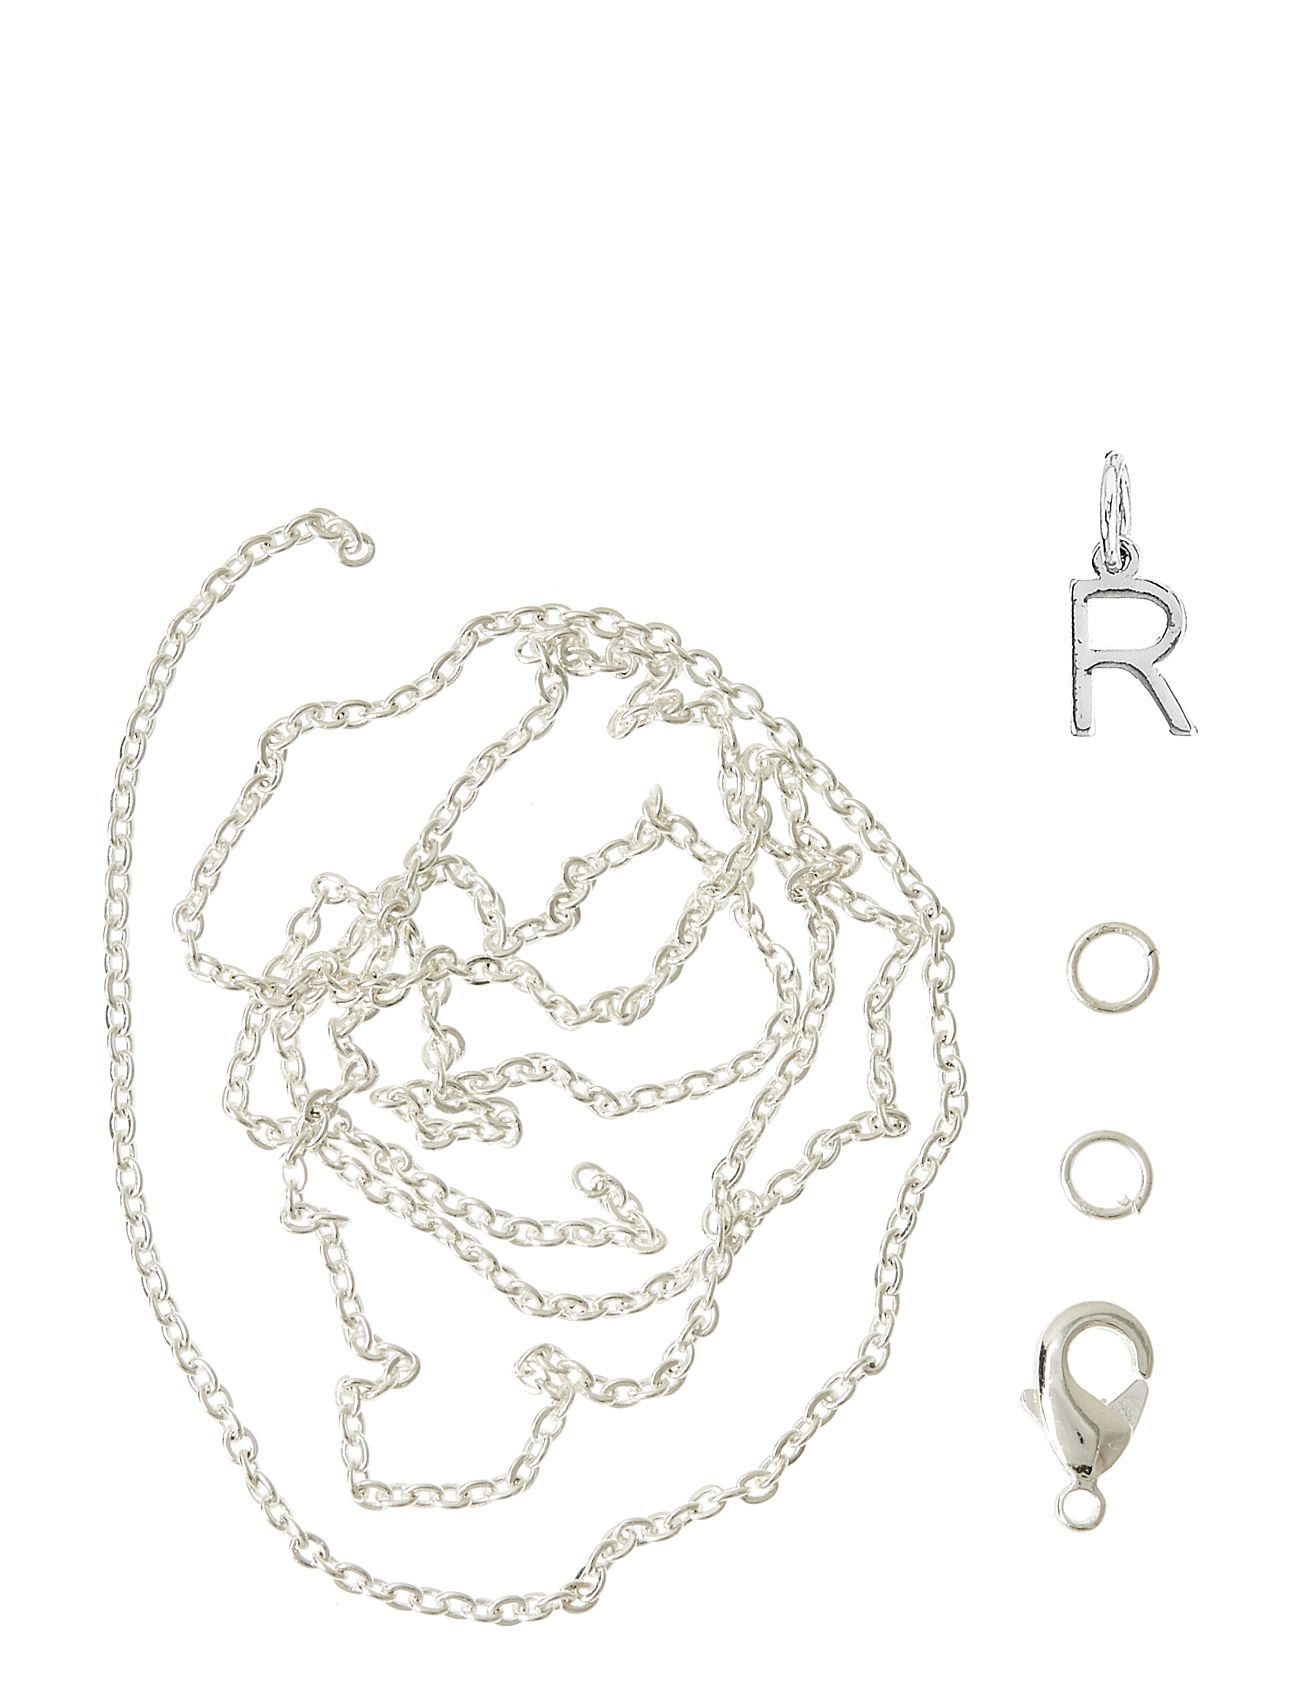 Letter R Sp With O-Ring, Chain And Clasp Toys Creativity Drawing & Crafts Craft Jewellery & Accessories Silver Me & My Box